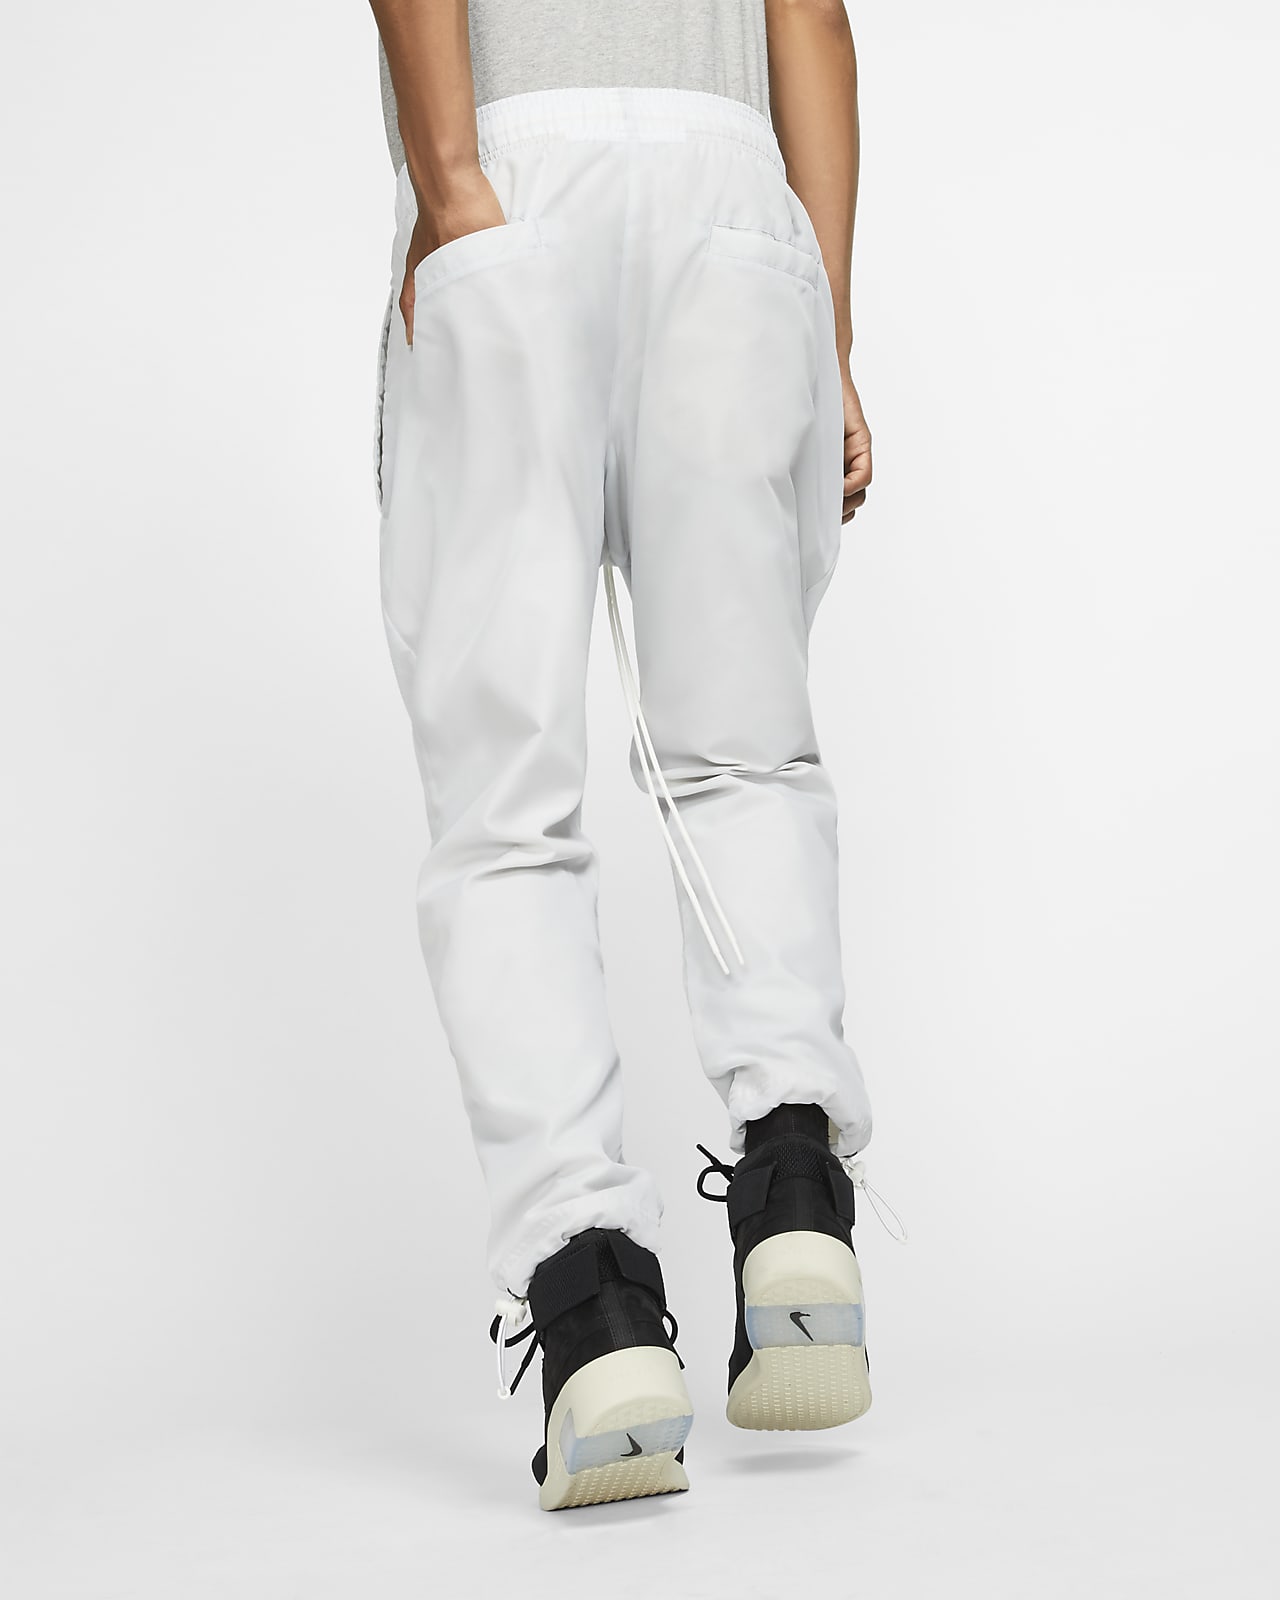 Nike X Fear Of God Jerry Lorenzo Track Pants In White For Men Lyst ...